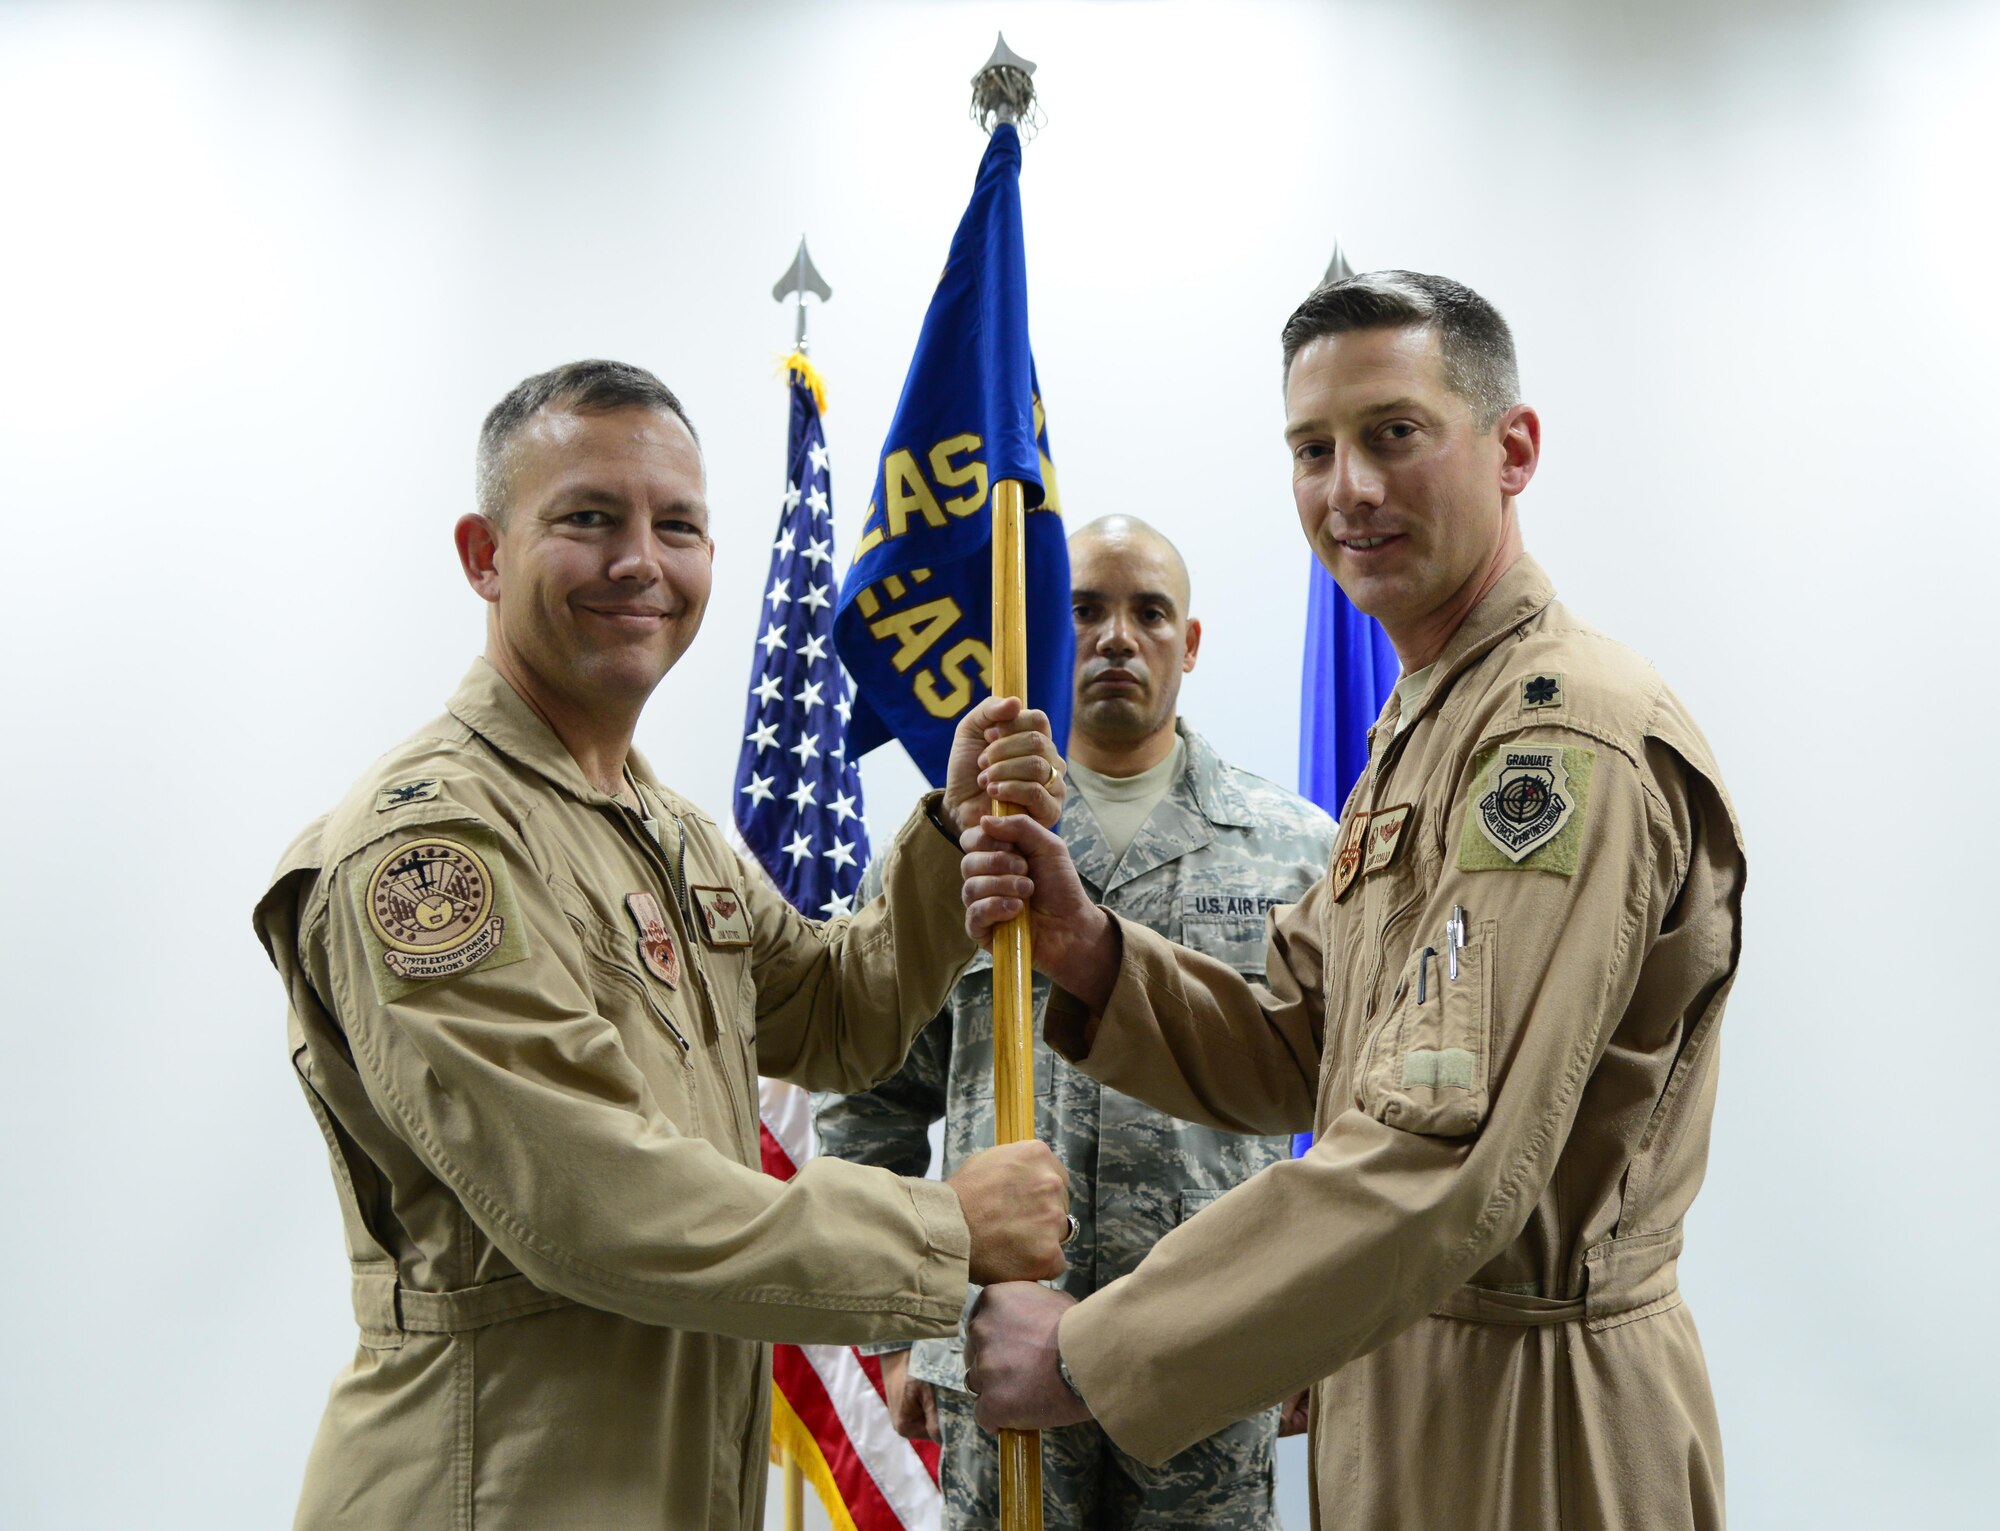 U.S. Air Force Lt. Col. Jeremy Schaad, right, passes the 746th Expeditionary Airlift Squadron guidon to Col. Jim Dittus, 379th Expeditionary Operations Group commander, to officially relinquish command during a change of command ceremony, March 1, 2015, at Al Udeid Air Base, Qatar. Schaad relinquished command of the 746th EAS to Lt. Col. Byron Newell. (U.S. Air Force photo by Senior Airman Kia Atkins)